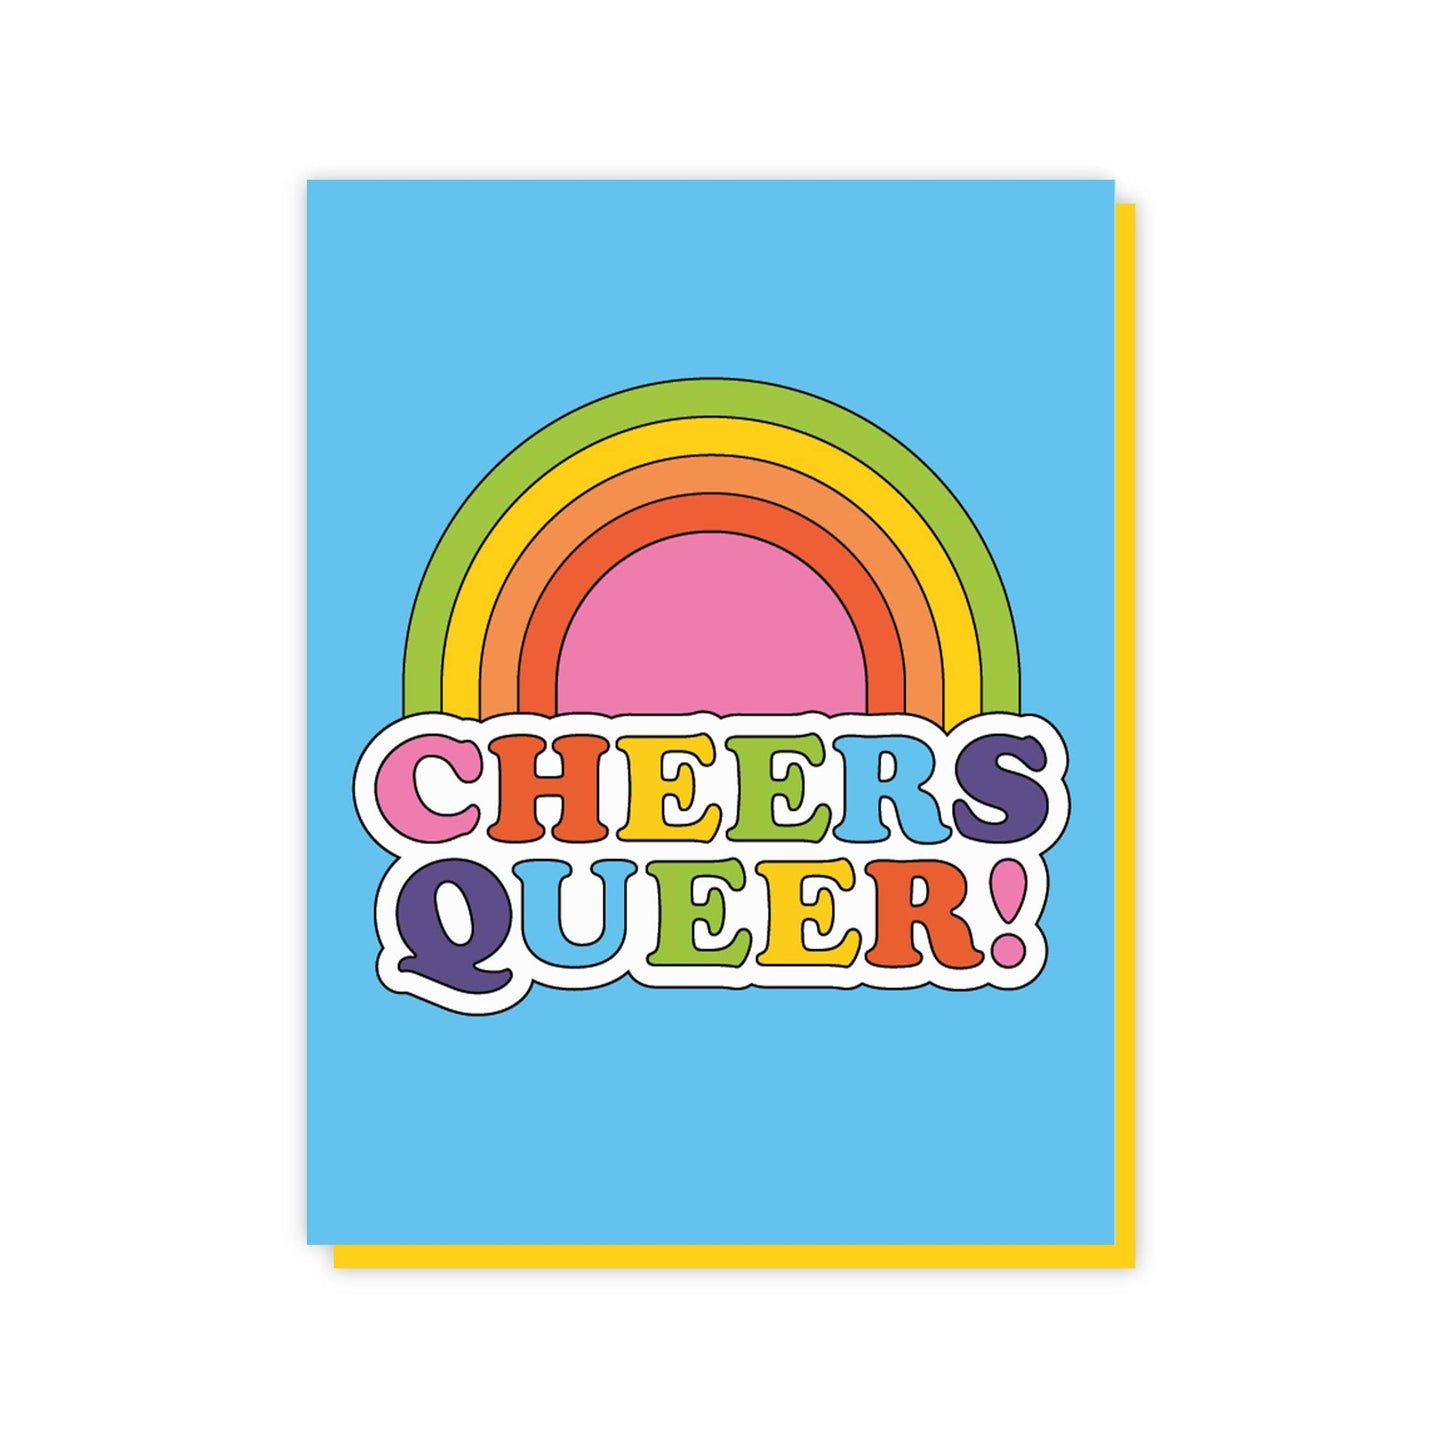 Cheers Queers Card